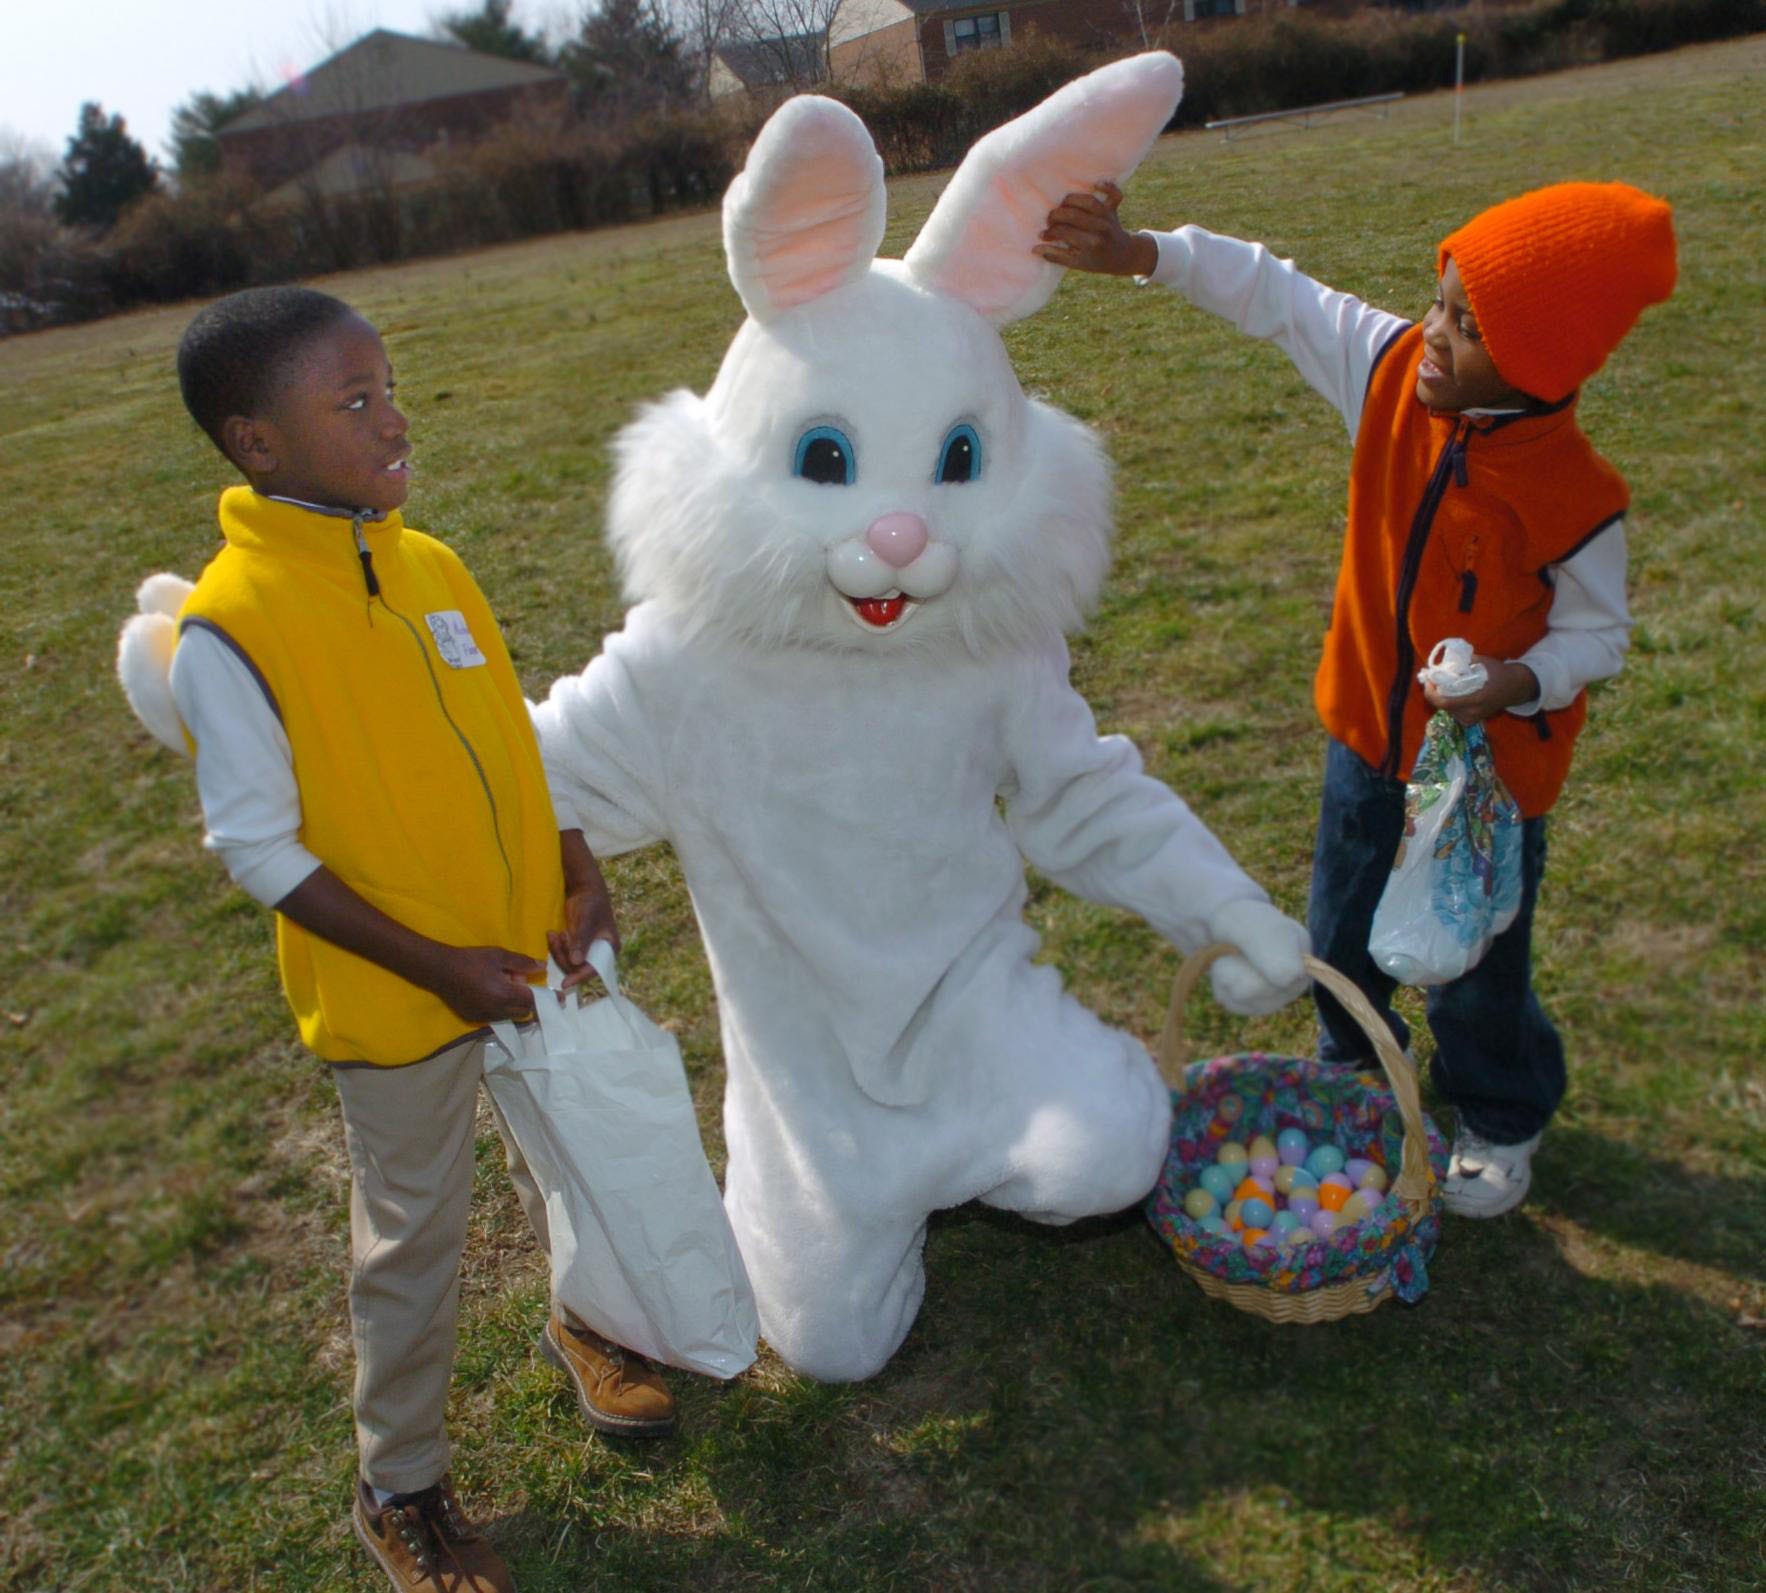 Michael Flamer, 8 of Felton, watches as six-year-old brother Anthony Flamer pulls on the Easter Bunny's ear after the Dover Parks and Recreation Annual Egg Hunt in 2005.